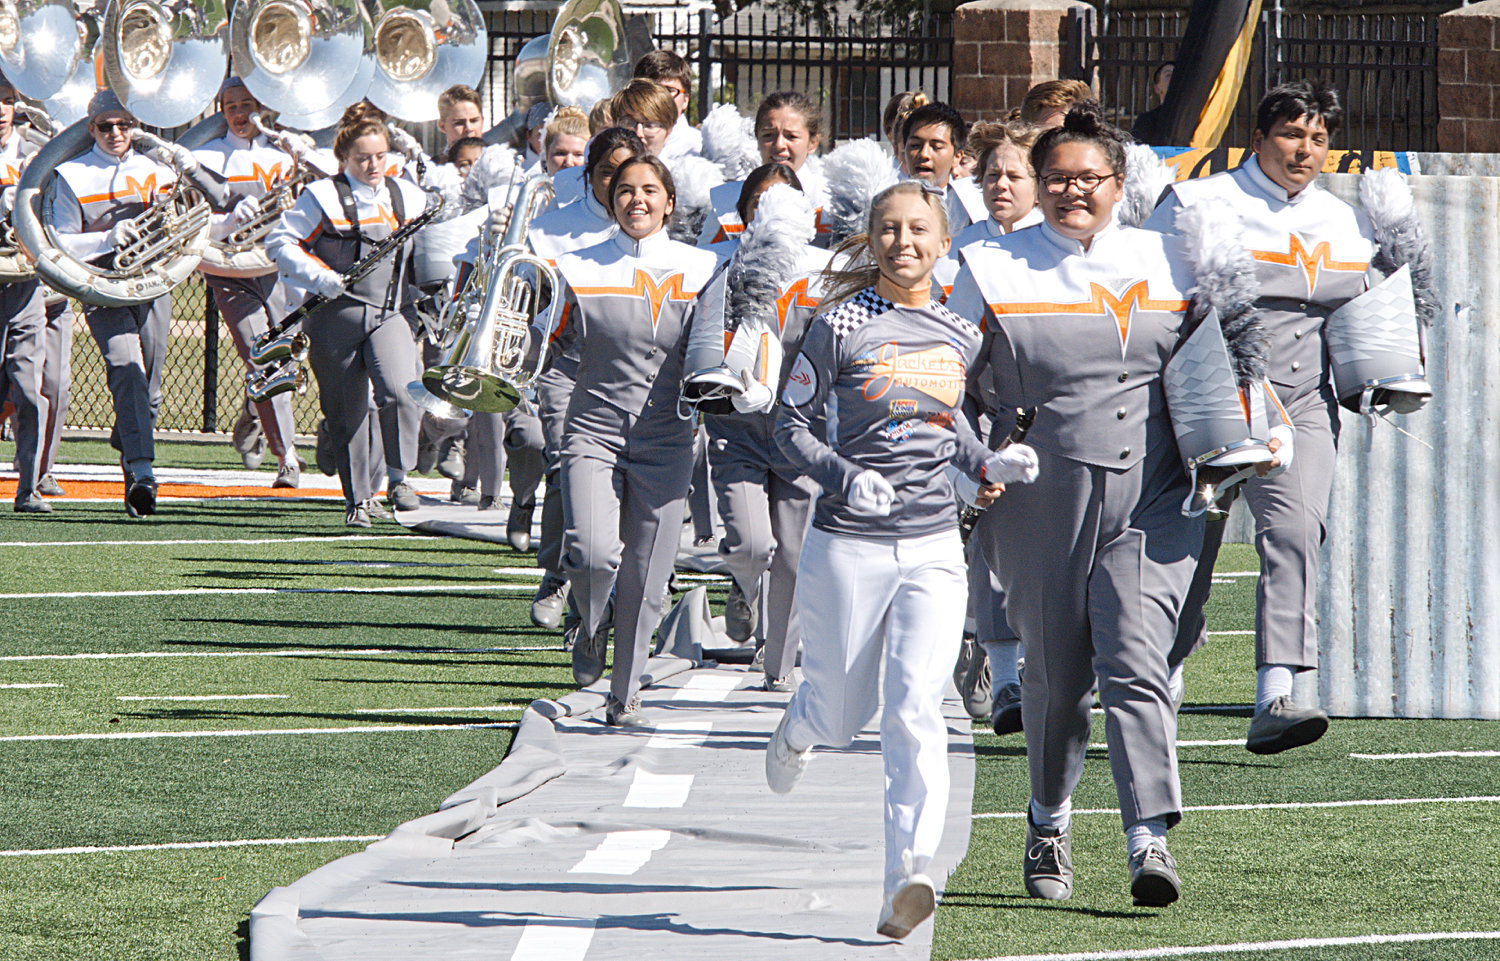 The Sound of the Swarm Mineola High School marching band is led onto the field by drum major Tristan Kirk on Tuesday at the Region 4 marching contest in Texarkana.